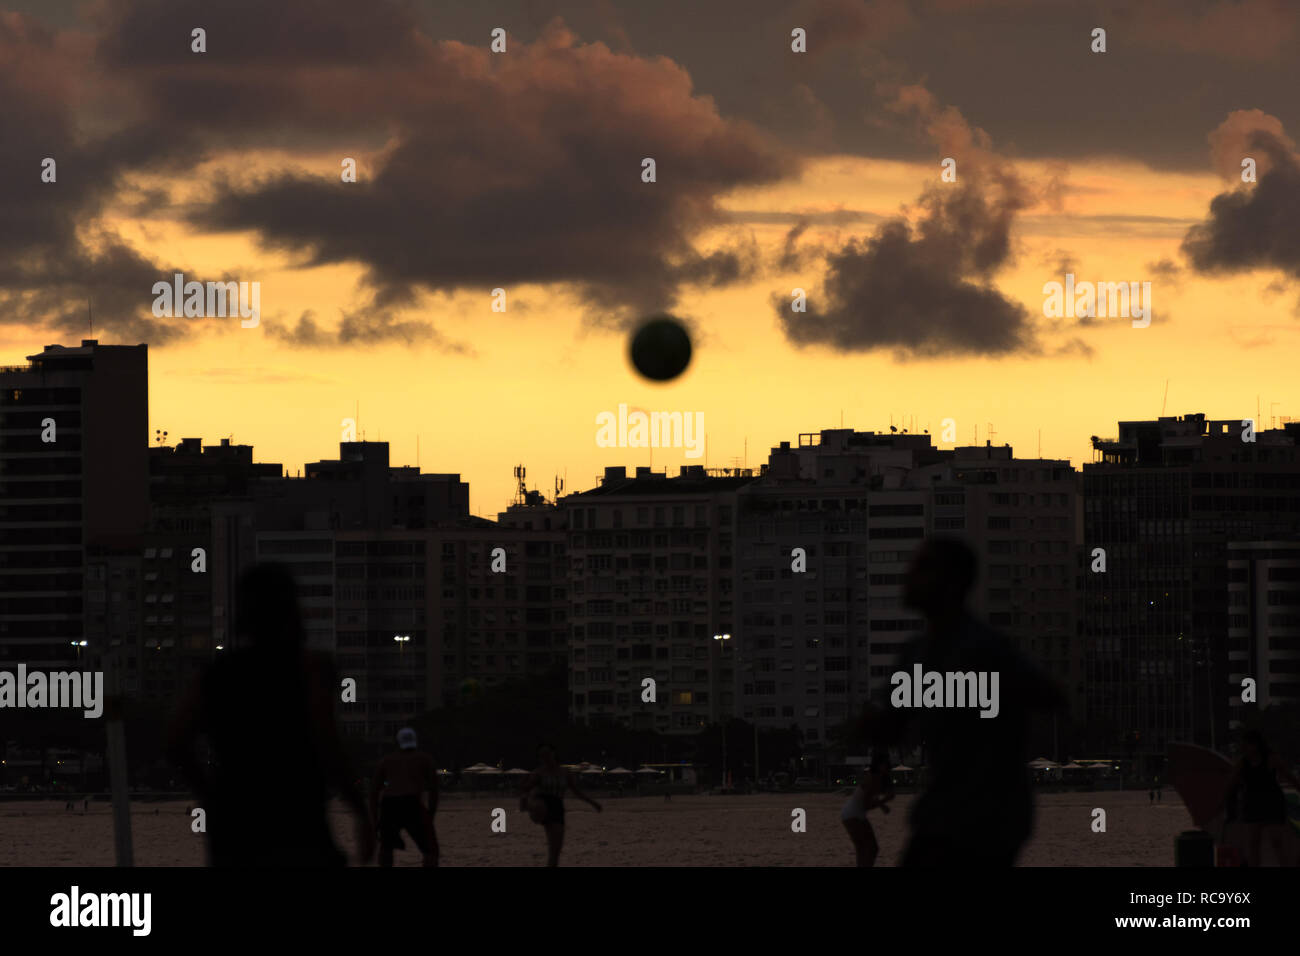 2019, january. Rio de Janeiro, Brazil. People playing football on the beach at the sunset, in Copacabana. Stock Photo